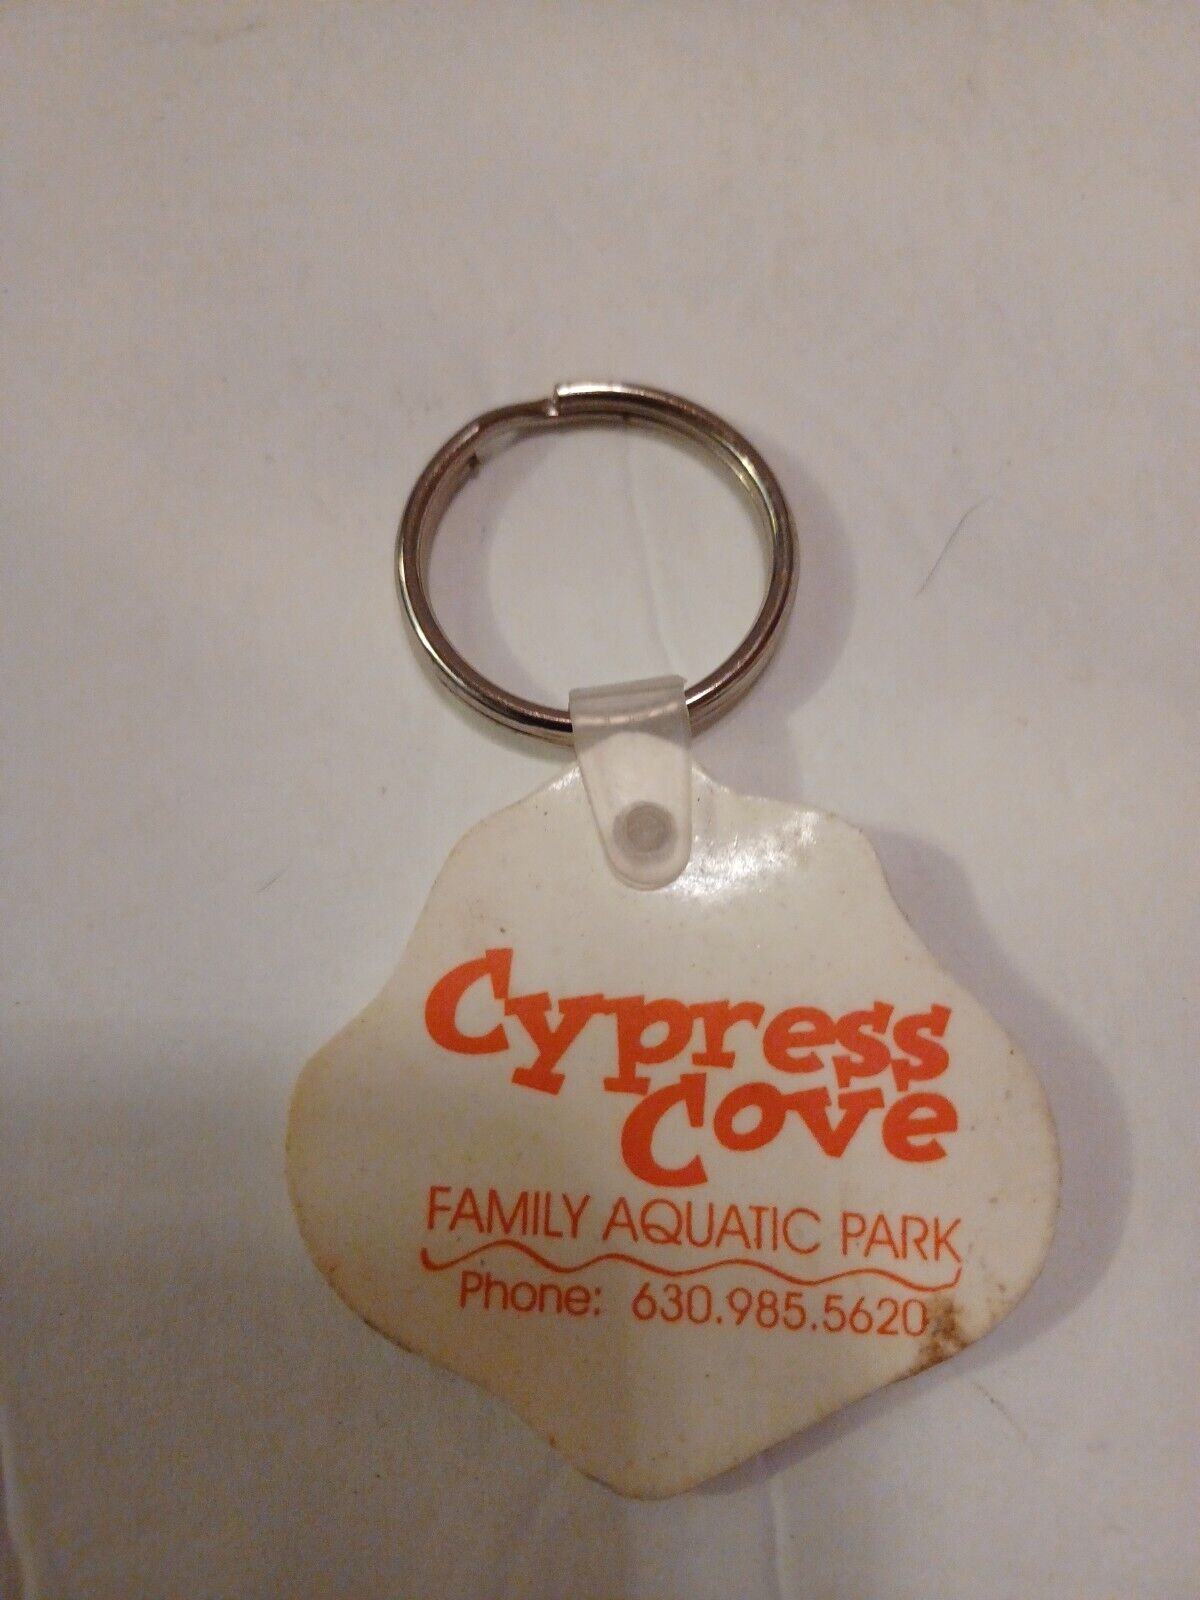 CYPRESS COVE FAMILY AQUATIC PARK RUBBER KEYCHAIN